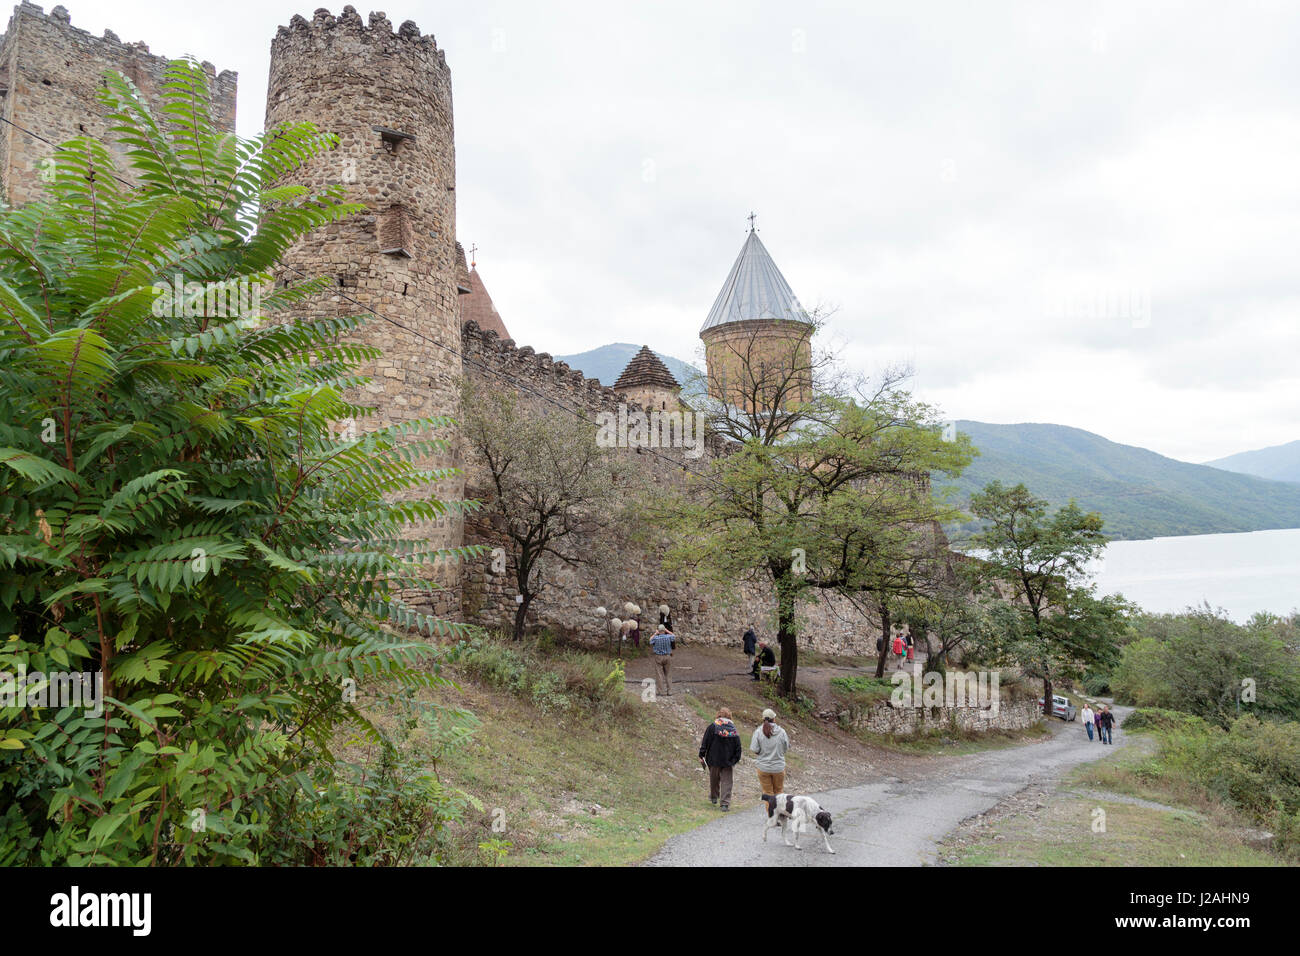 Georgia, Aragvi. Ananuri Castle complex with the Aragvi river behind it. Stock Photo